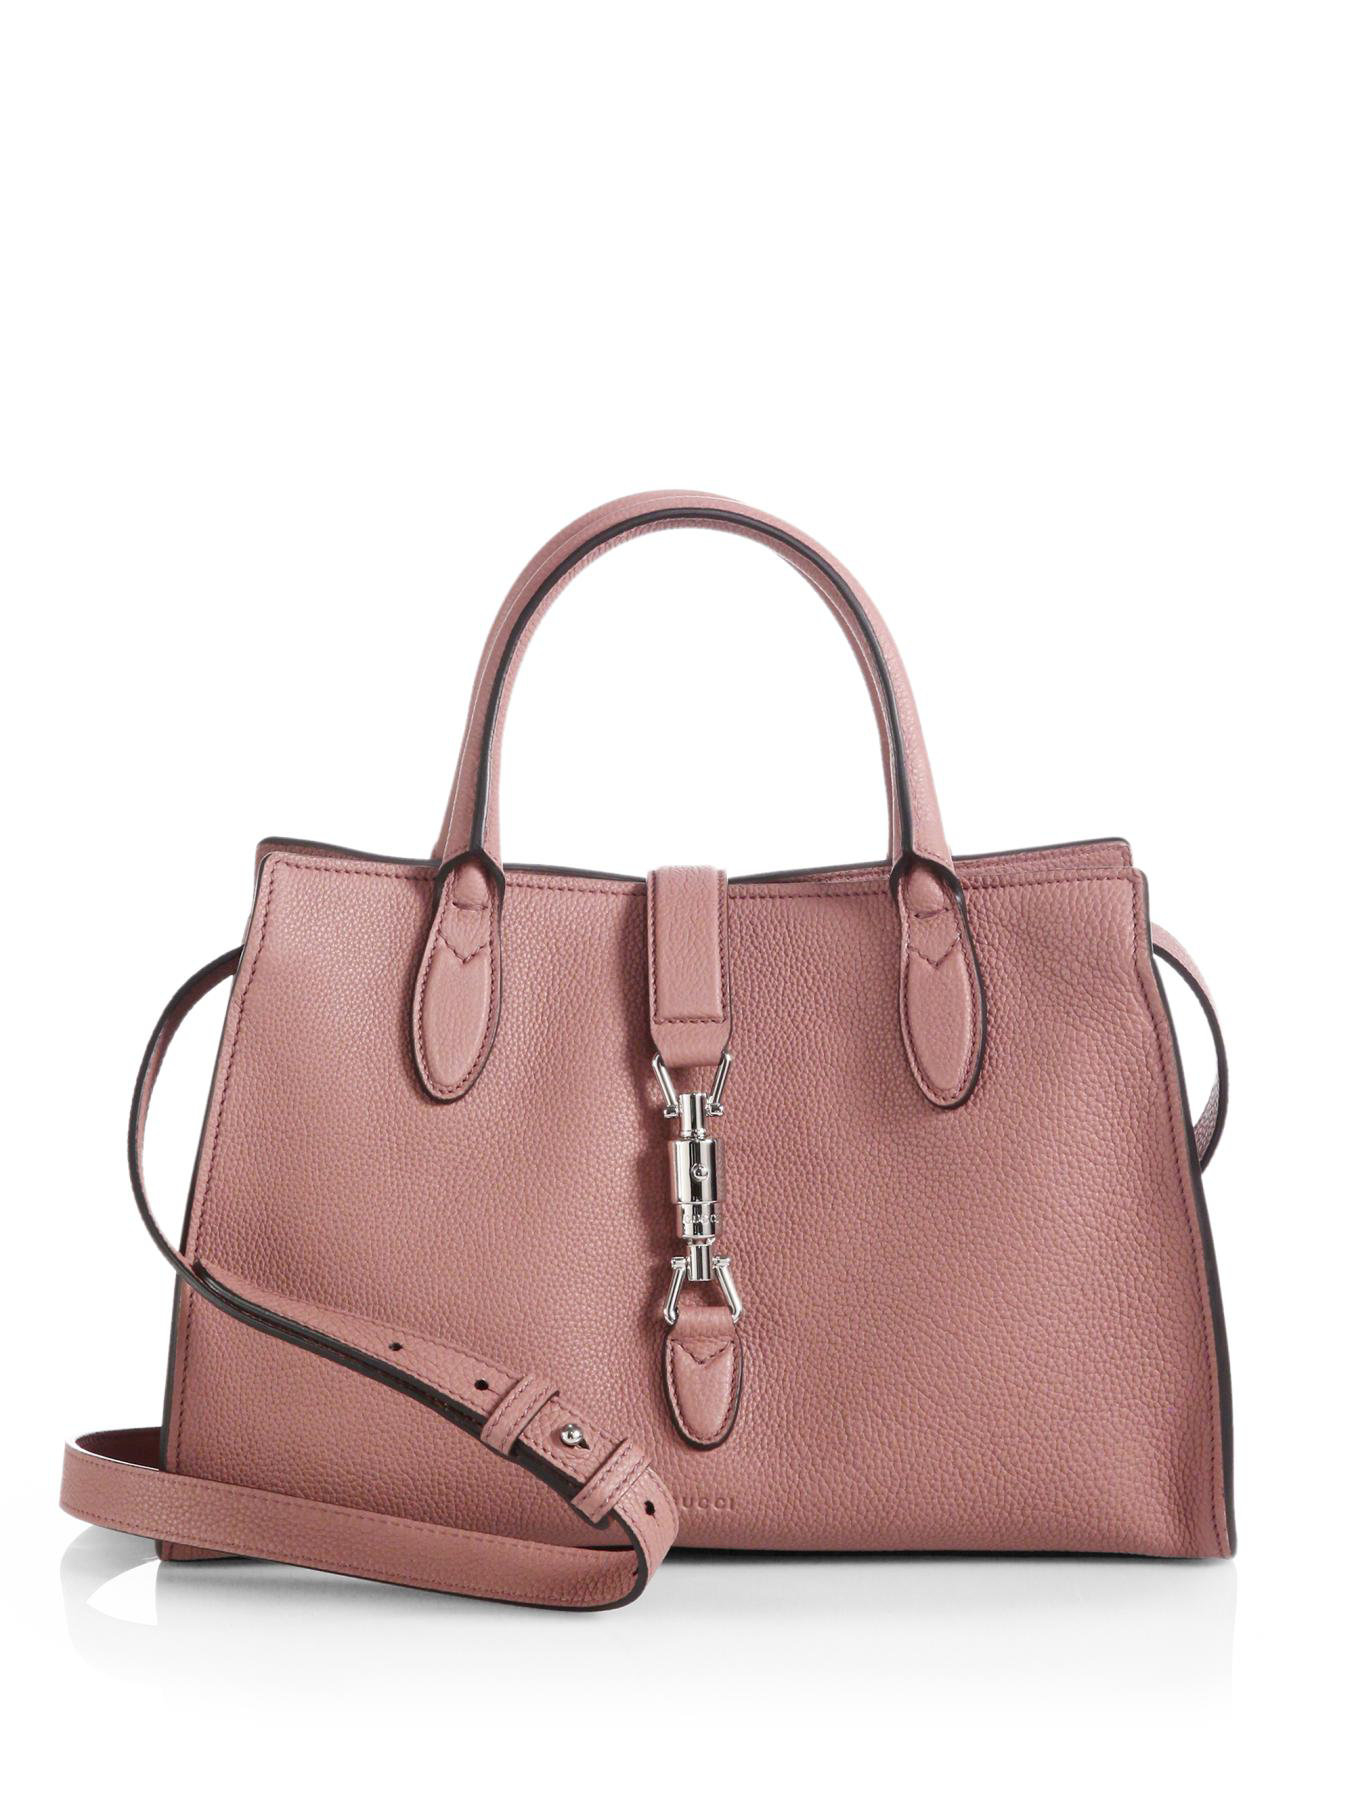 Gucci Jackie Soft Leather Top Handle Bag in Pink | Lyst